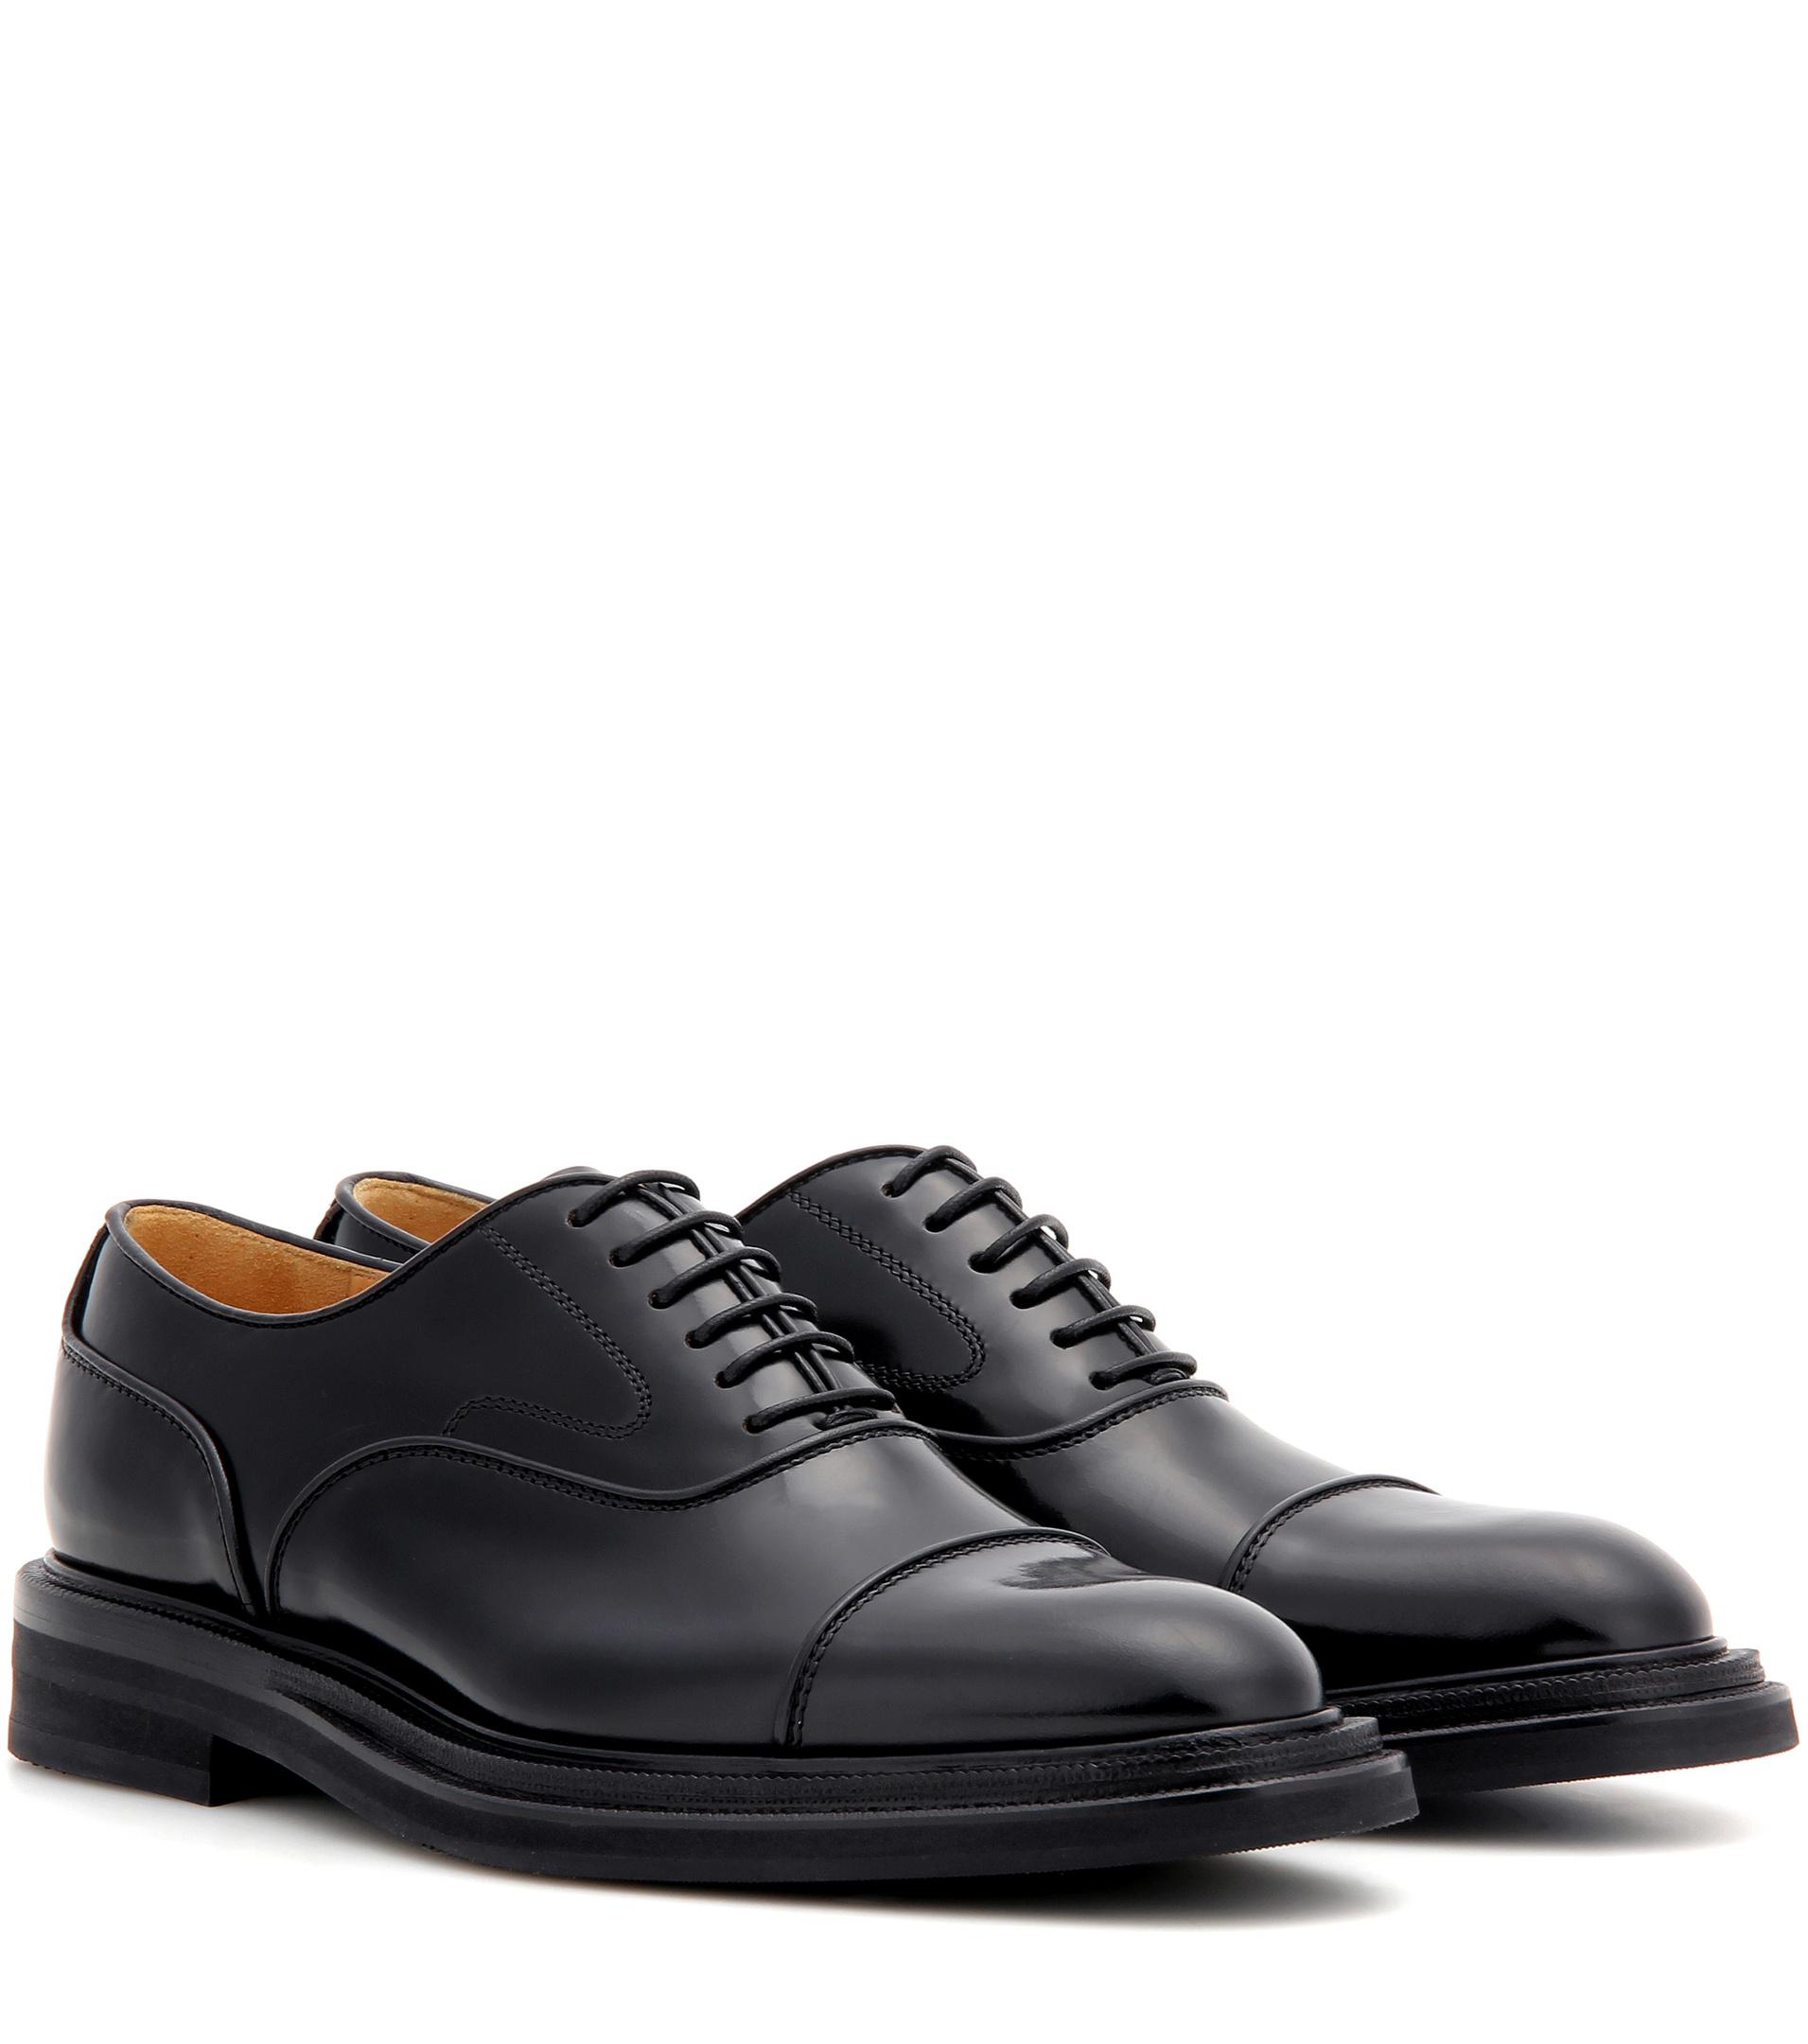 Lyst - Church'S Pam Leather Oxford Shoes in Black